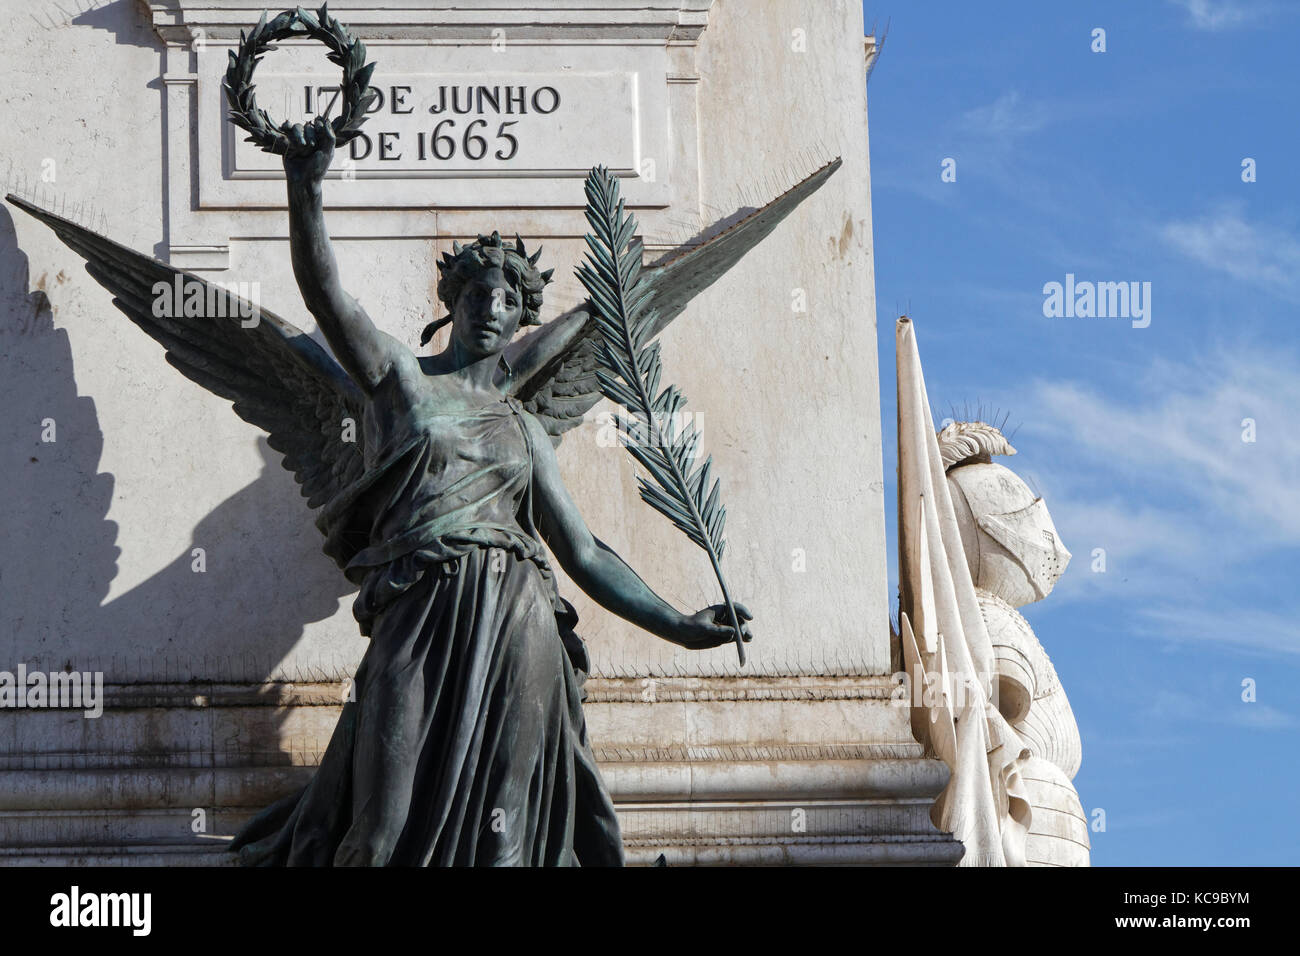 LISBON, Portugal, April 5, 2017 : Restauradores square. The place is dedicated to the restoration of the independence of Portugal in 1640. Stock Photo